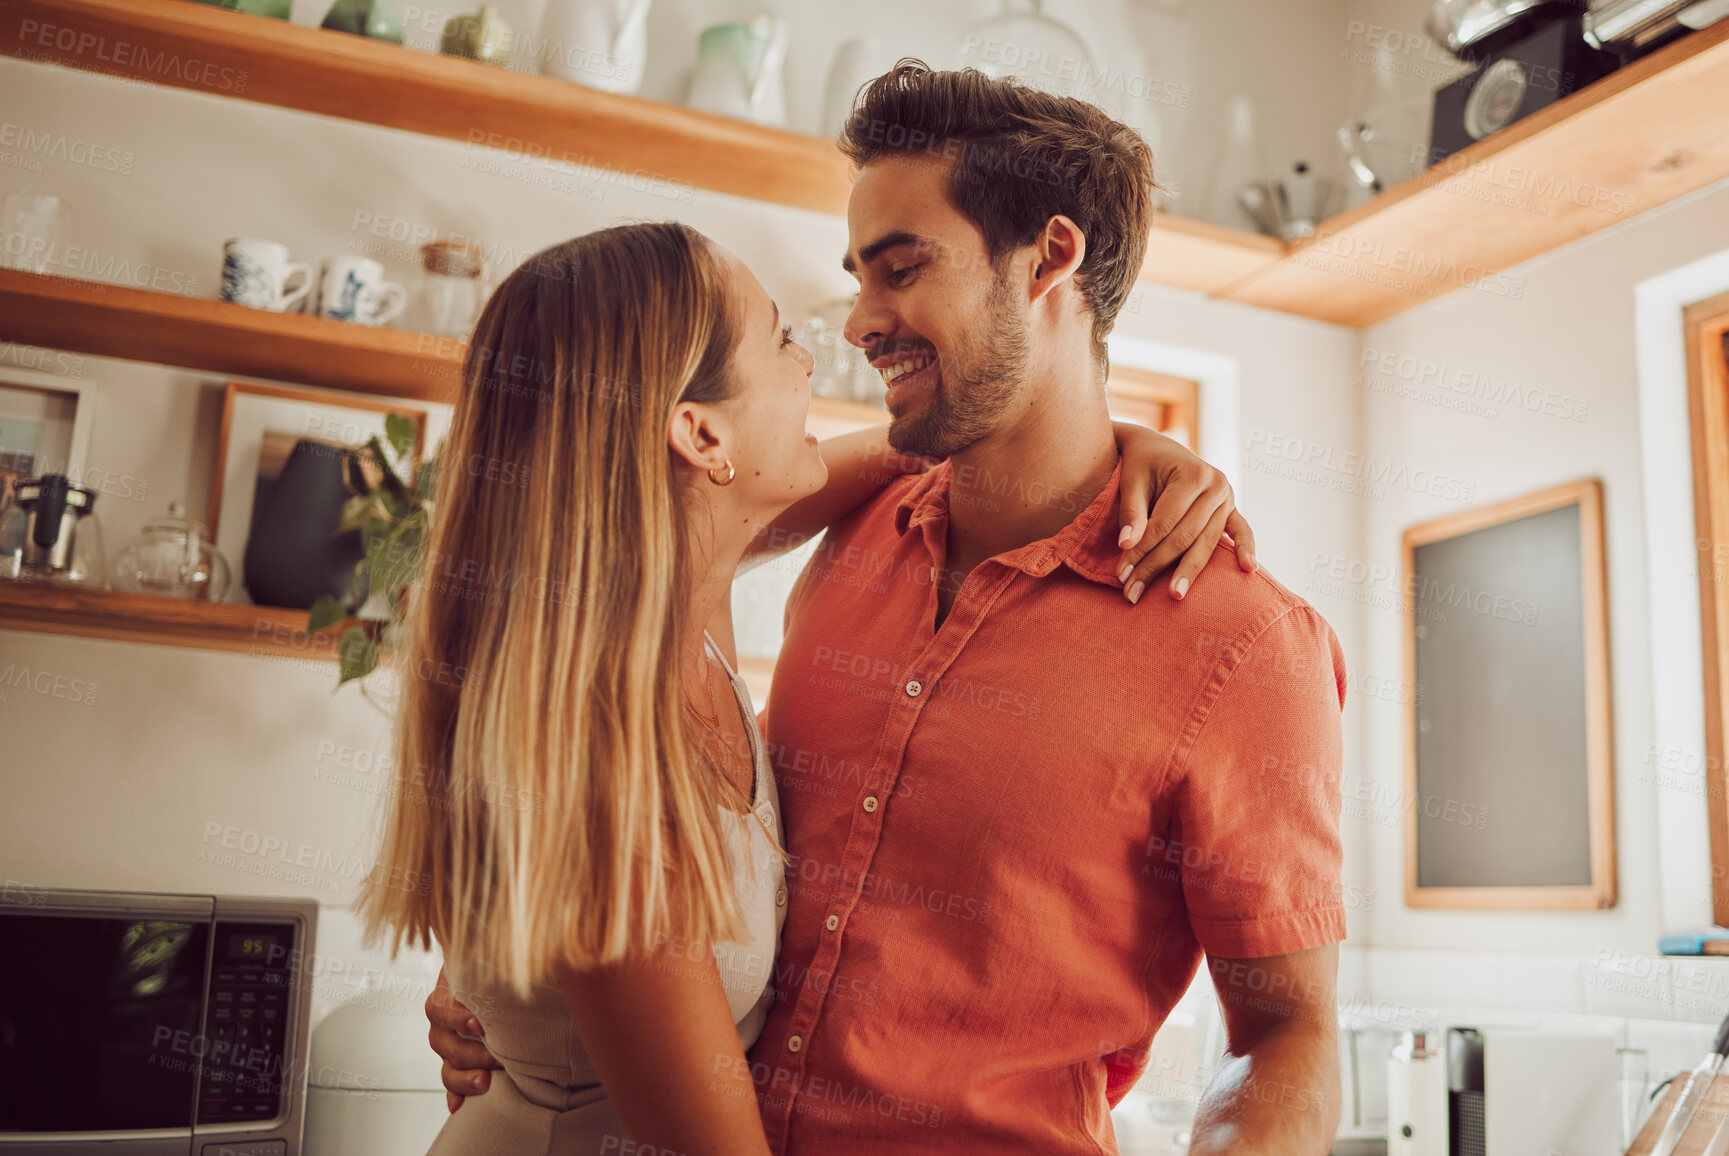 Buy stock photo Romance, happy and love couple hugging, smile and bonding in kitchen. Romantic boyfriend and girlfriend embracing, enjoying their relationship and being carefree together.